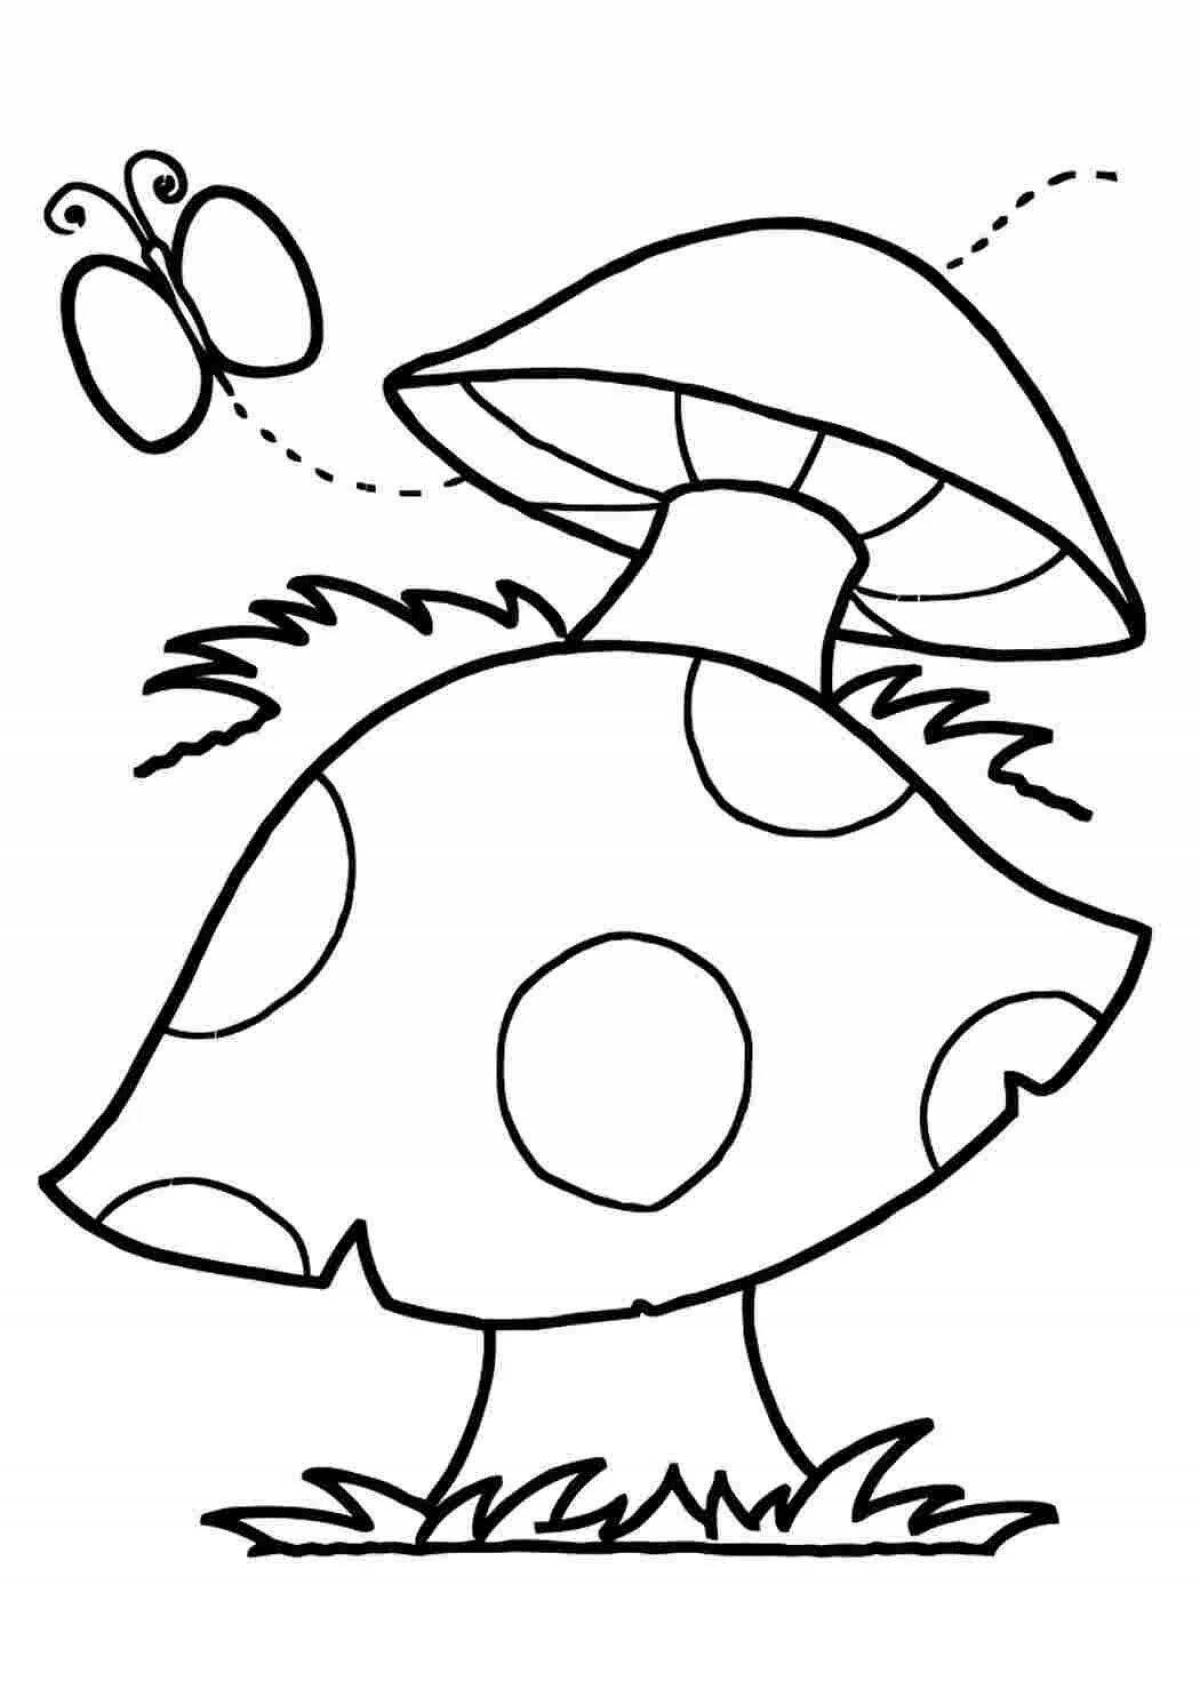 Coloring page festive toadstool